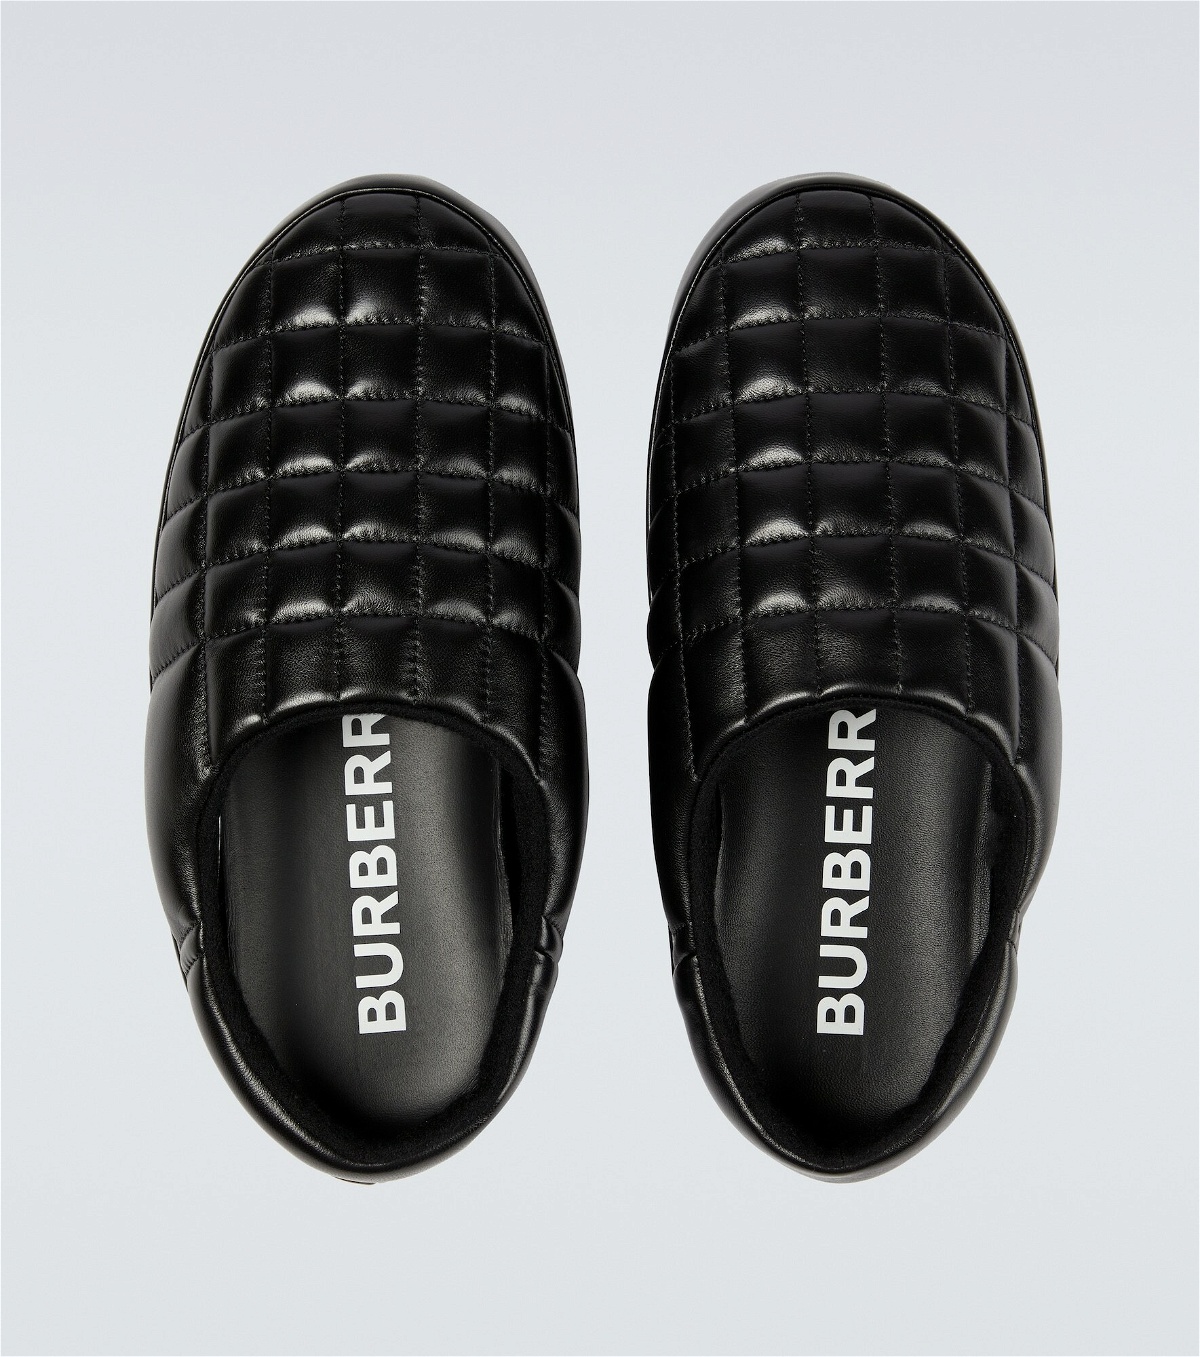 Burberry - Quilted leather slippers Burberry